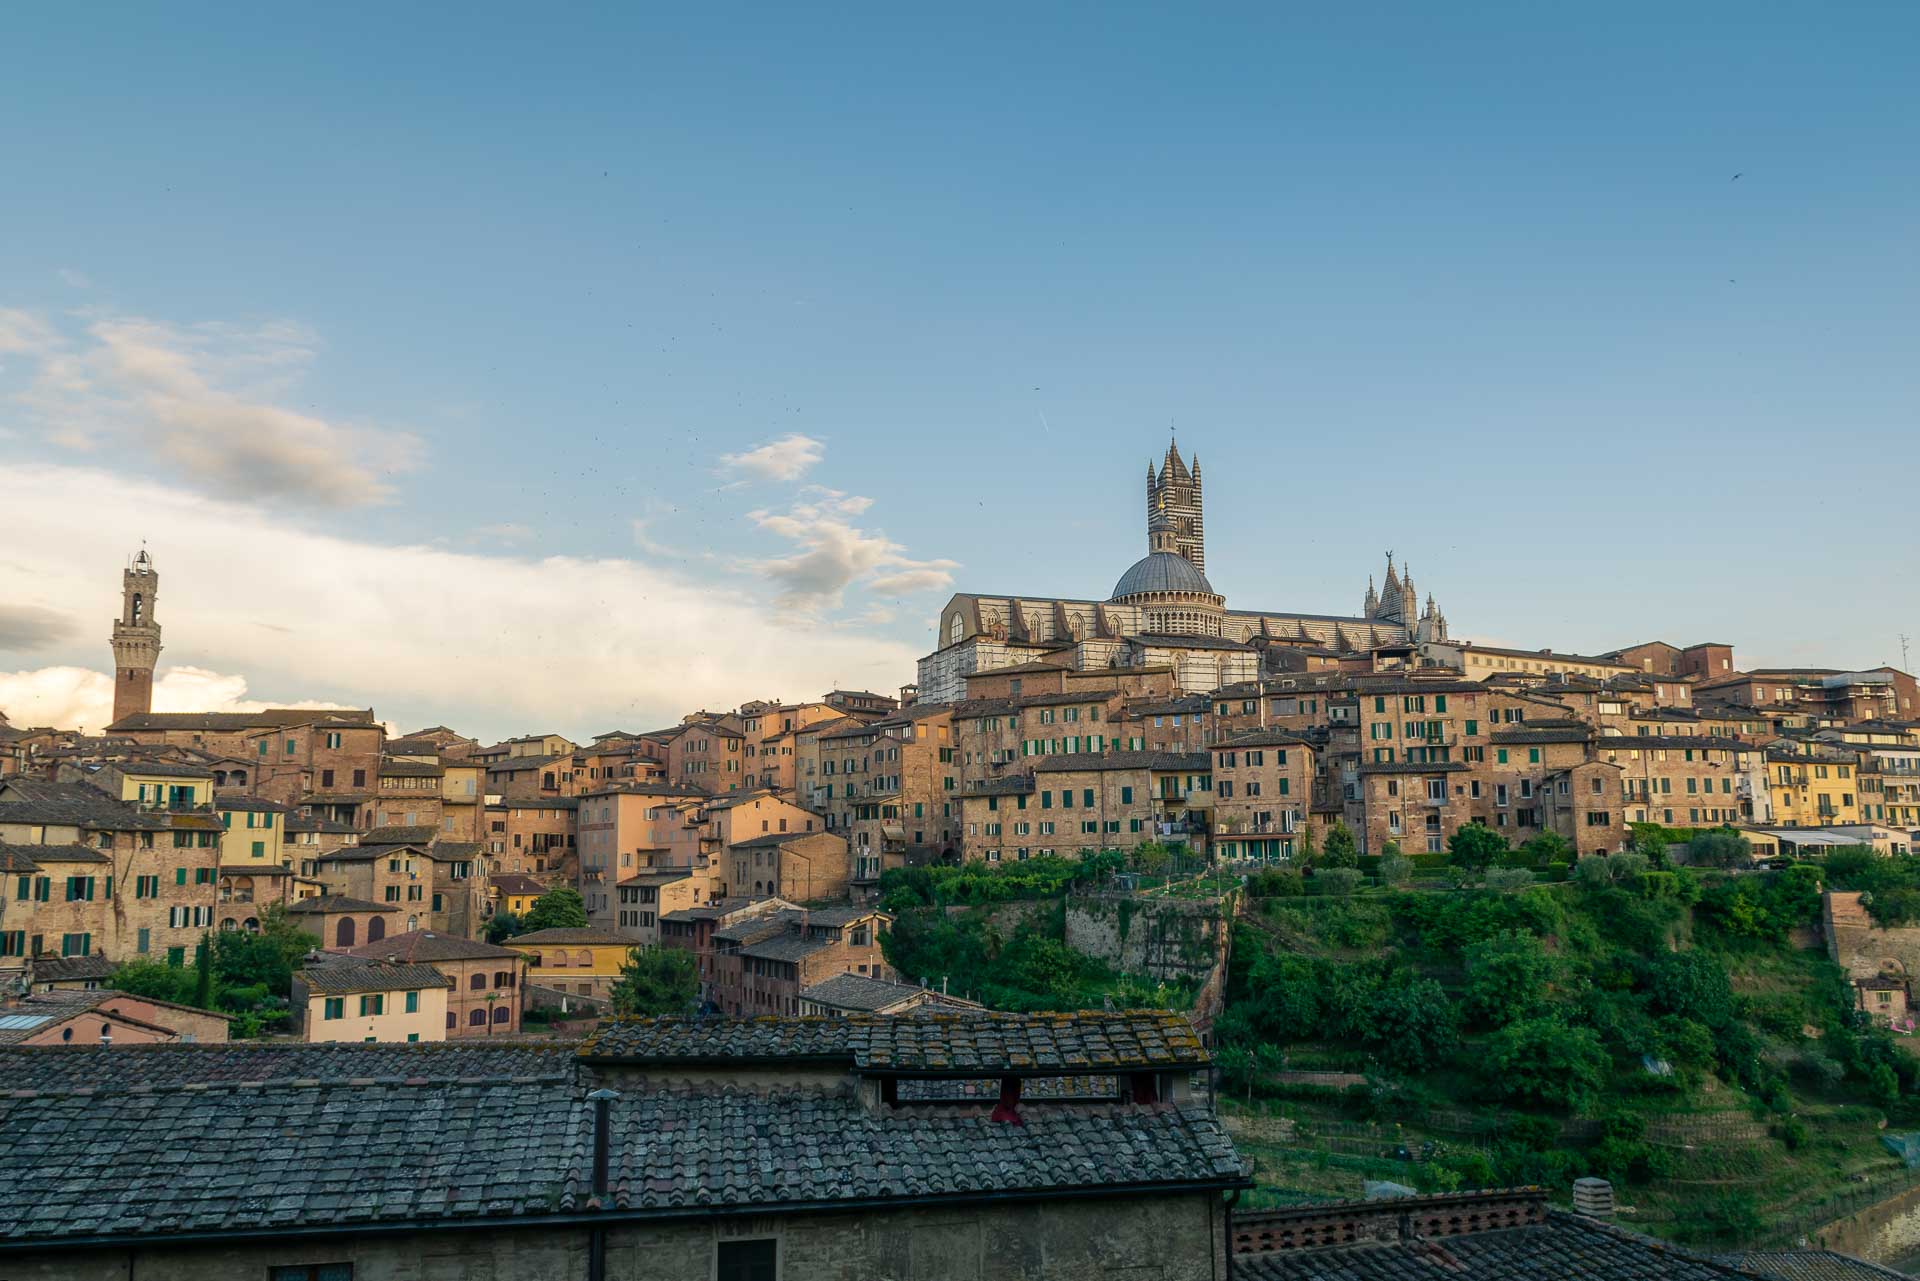 A panorama view of the Siena Town in Tuscany